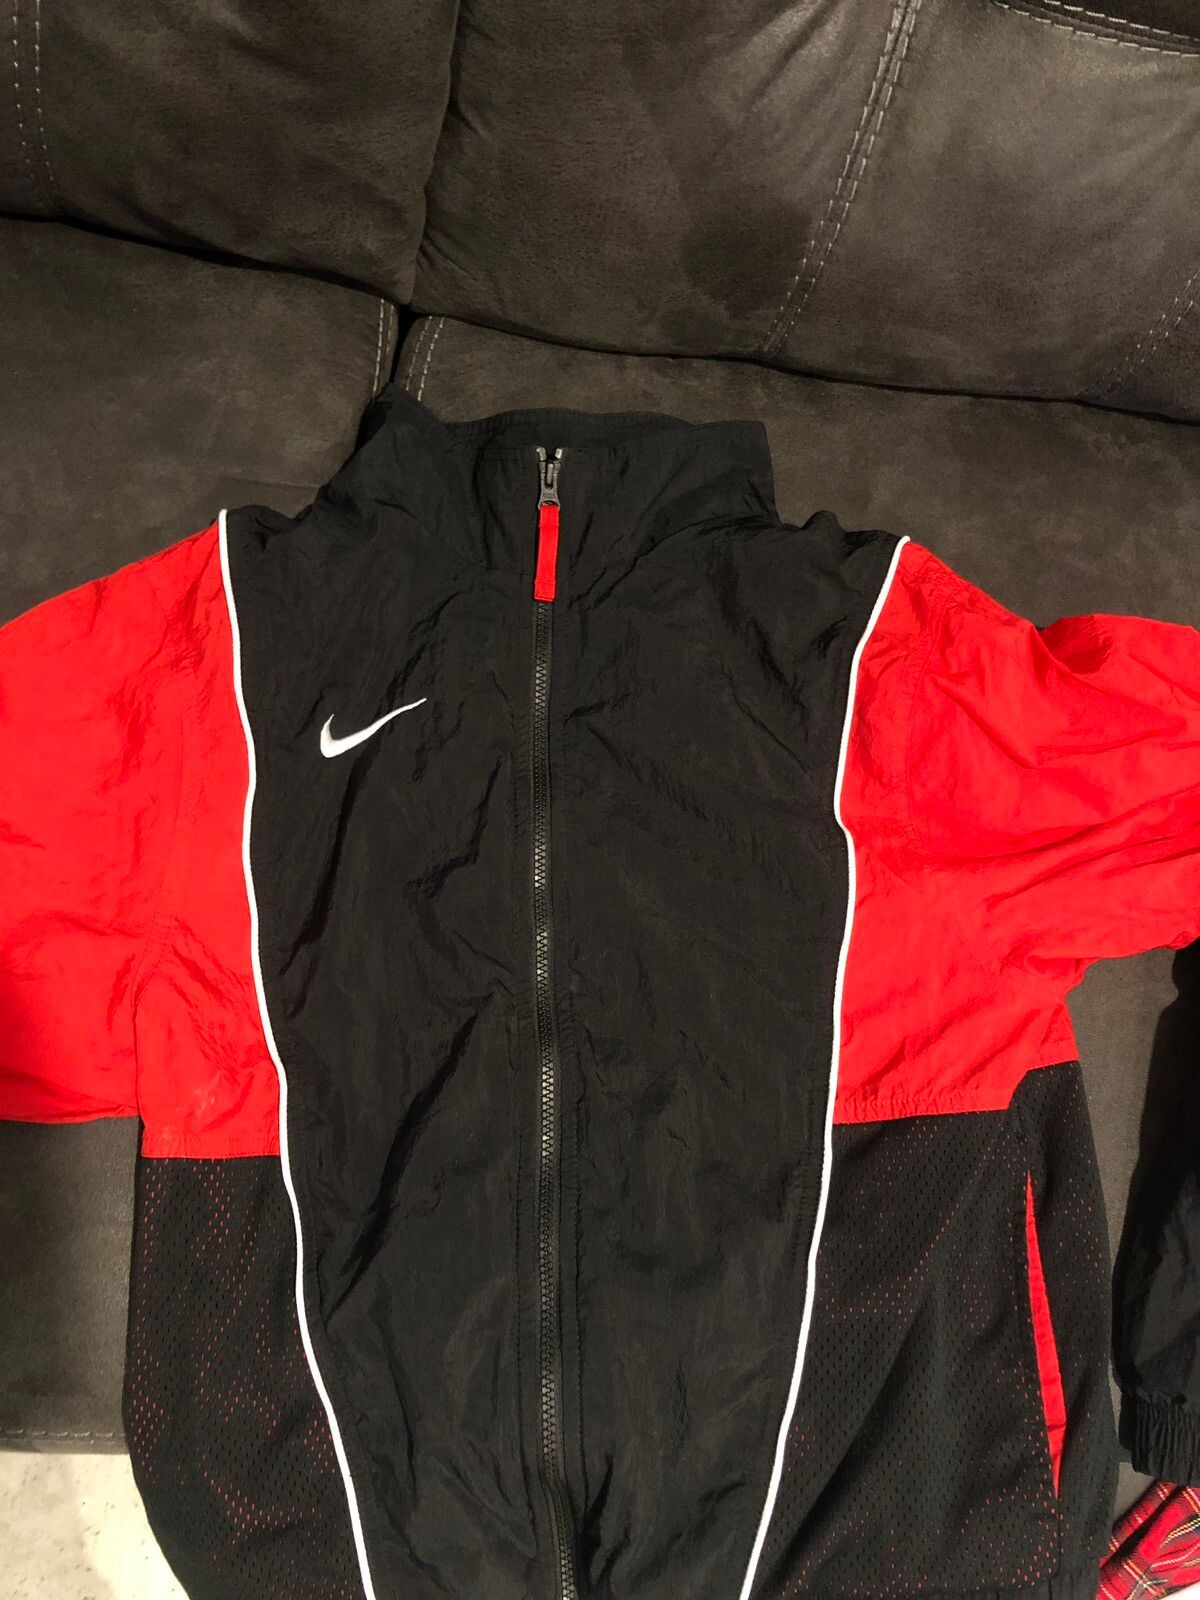 Nike Red Nike jacket Size US S / EU 44-46 / 1 - 1 Preview